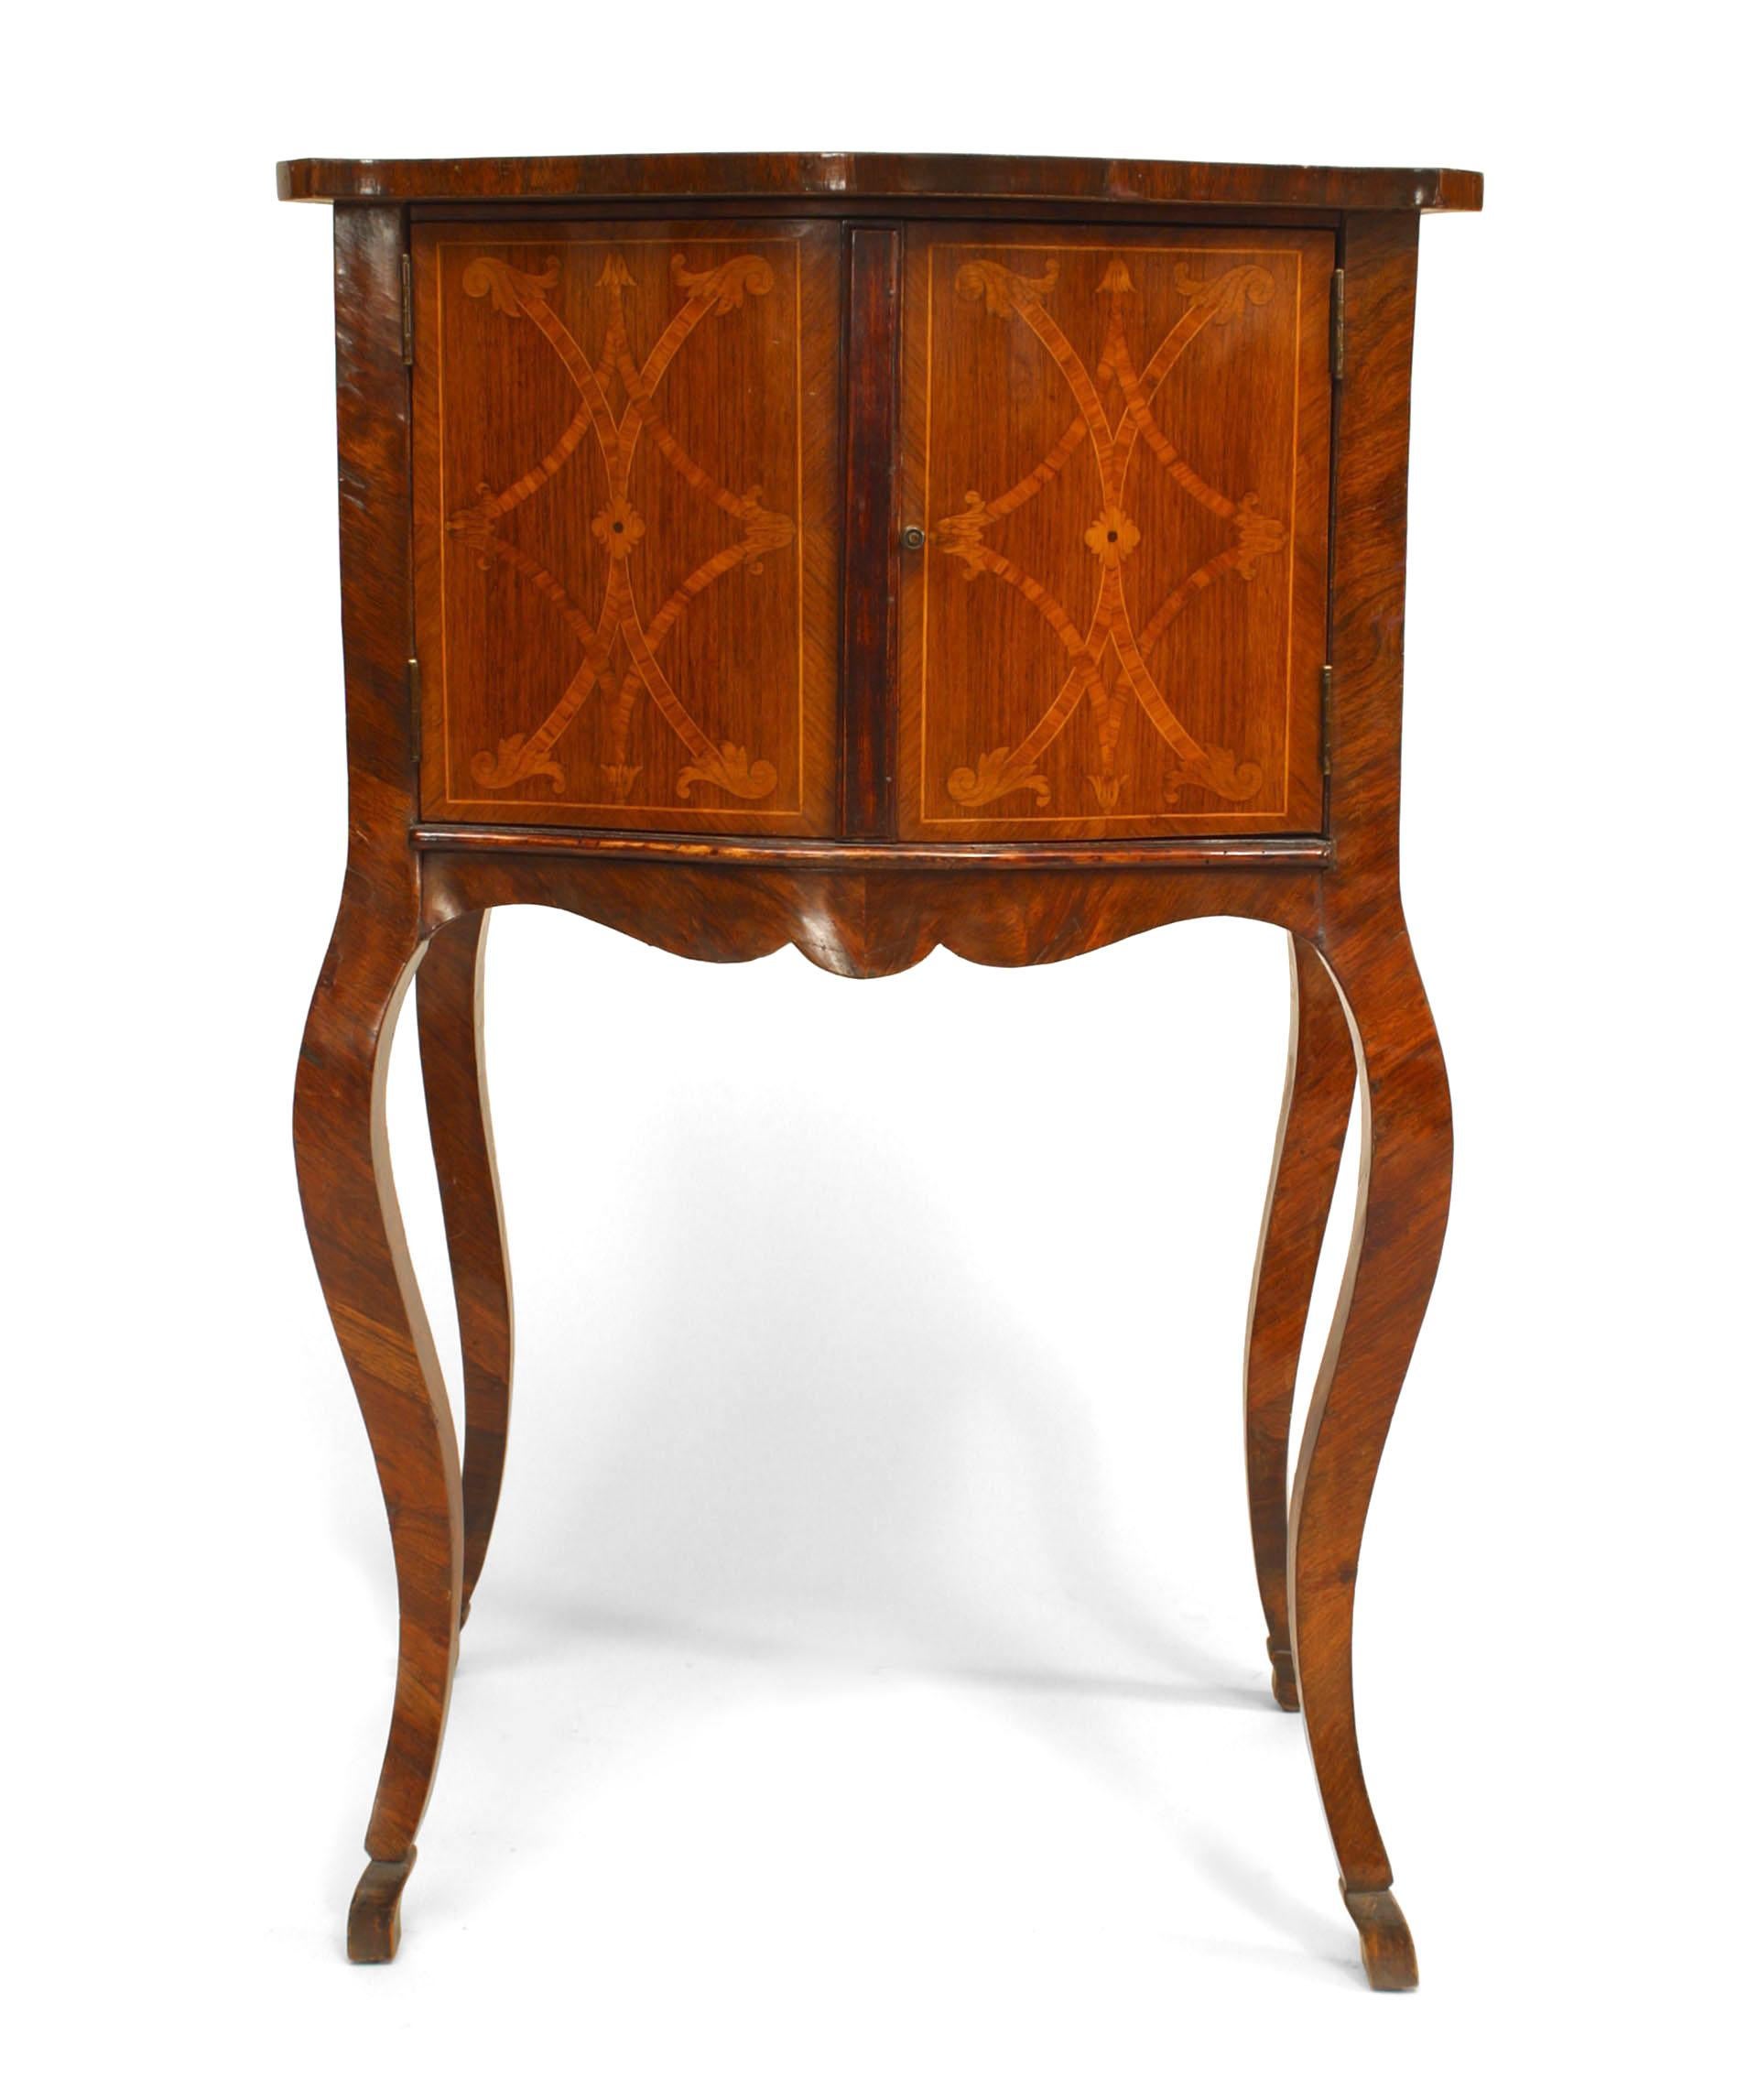 Neoclassical Italian Neoclassic Style Walnut and Tulipwood Bedside Commode For Sale